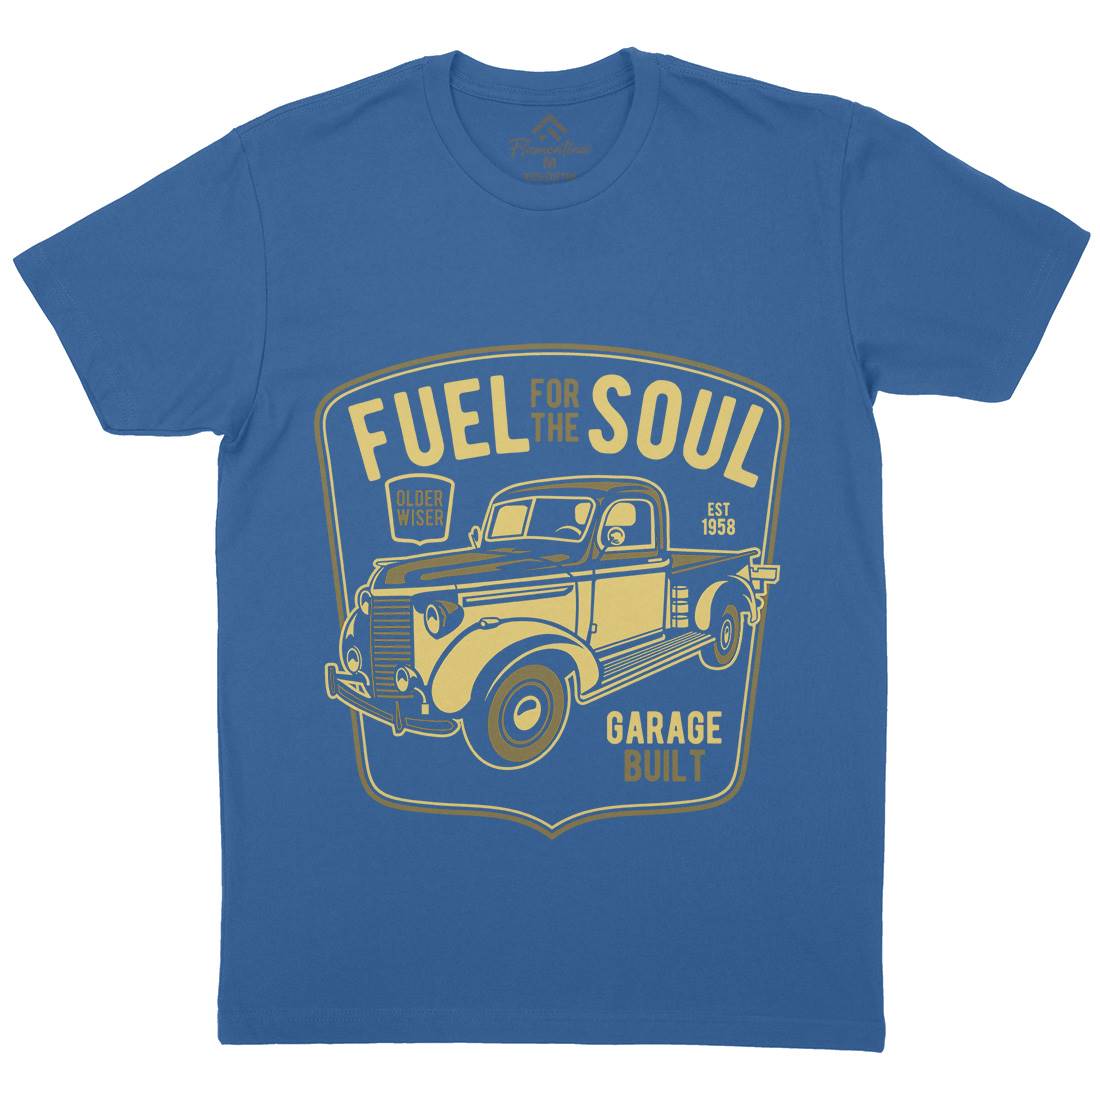 Fuel For The Soul Mens Organic Crew Neck T-Shirt Cars B213